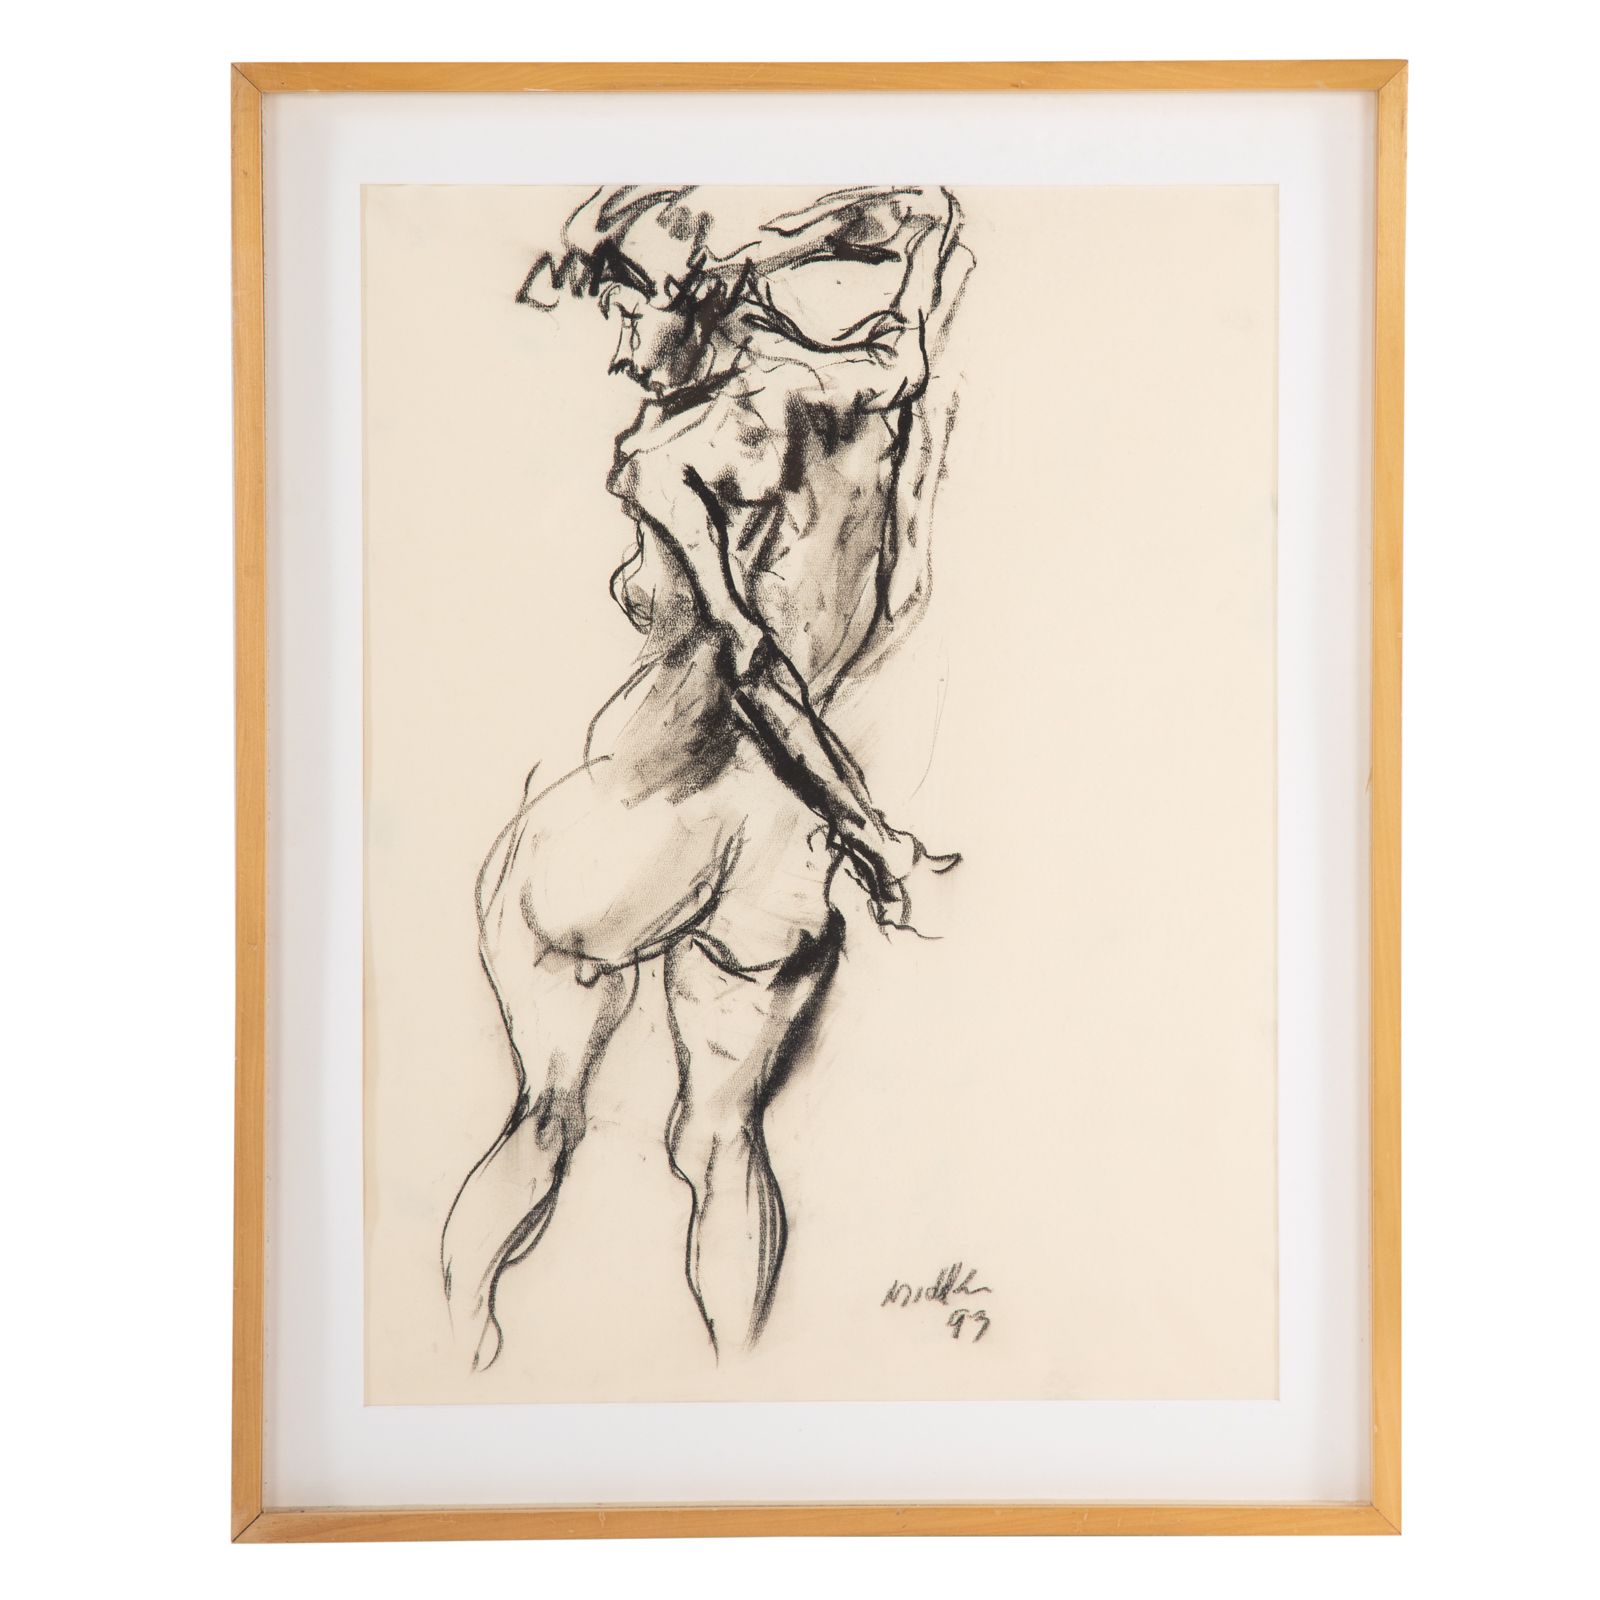 RAOUL MIDDLEMAN. FEMALE NUDE STUDY,